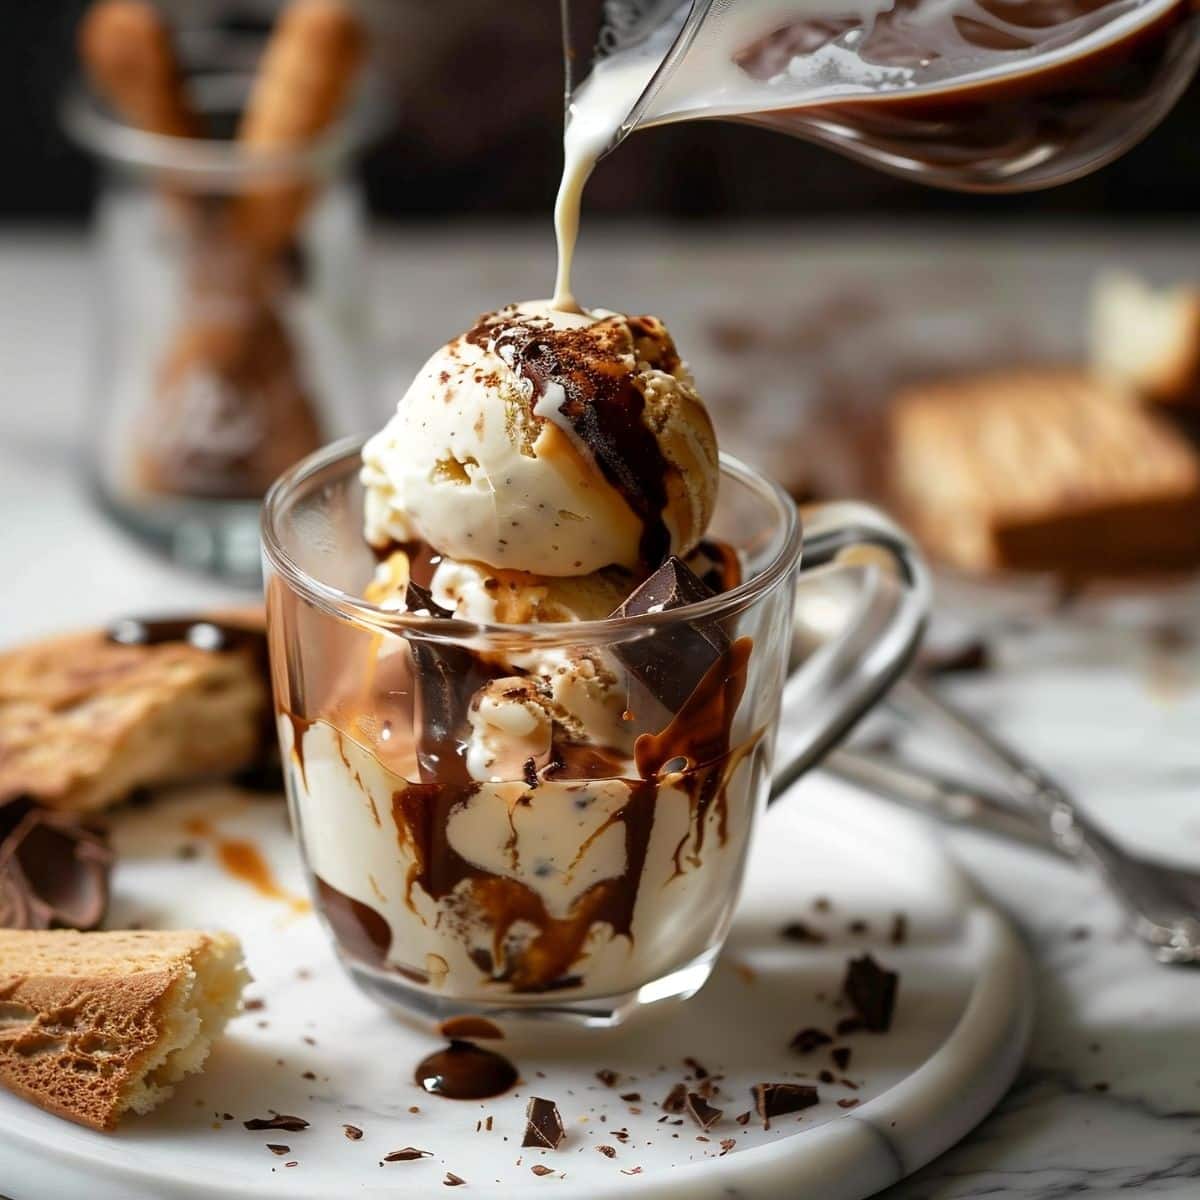 Pouring Espresso Over Ice Cream, Chocolate, and Amaretto in a Glass Mug with Cocoa Powder and Chocolate Drizzle on a White Plate with Biscotti